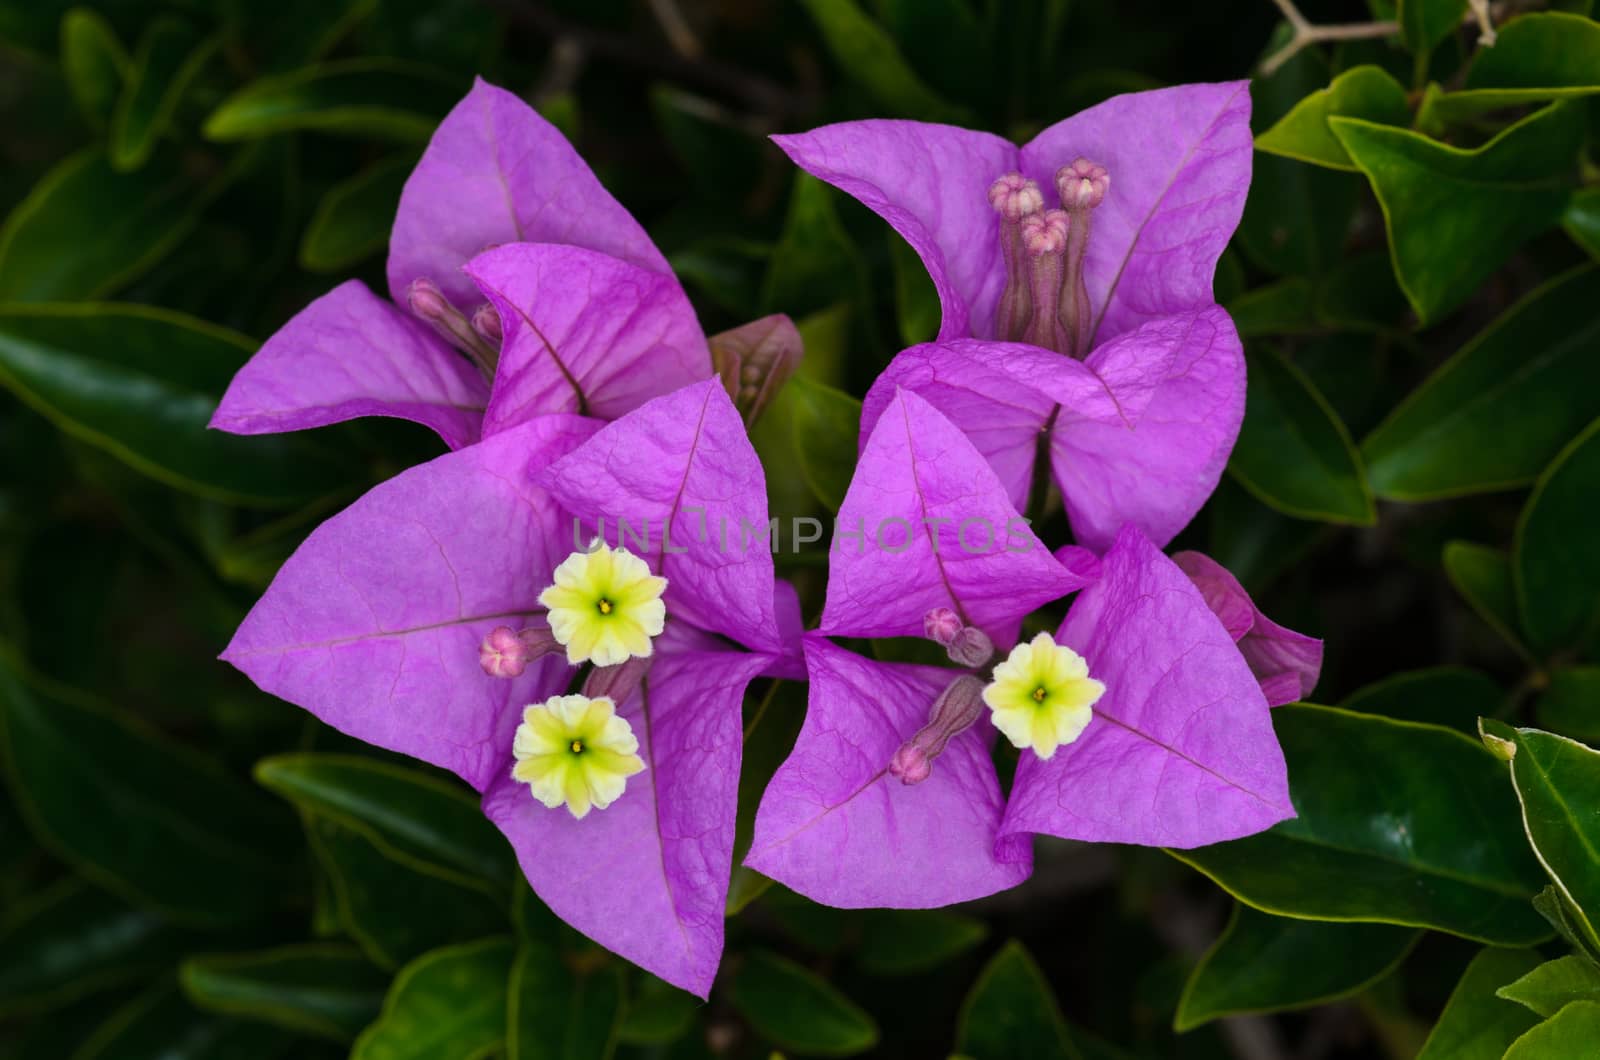 closeup of purple Bougainvillea flowers in the garden,
shot with natural light